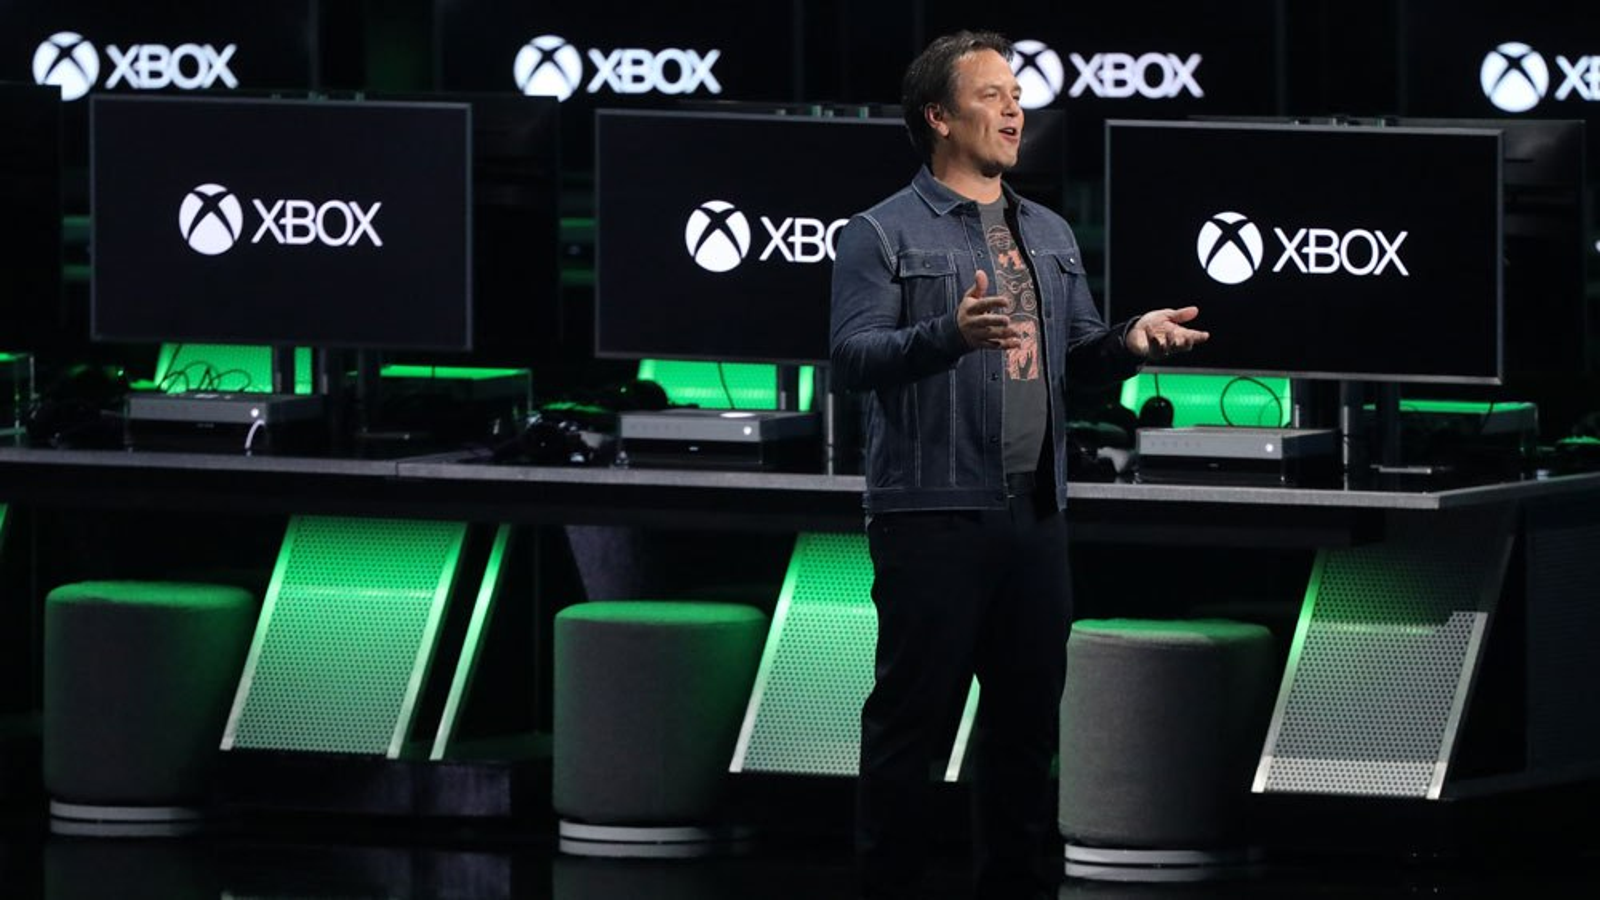 Microsoft targeted next Xbox for 2028, court docs show